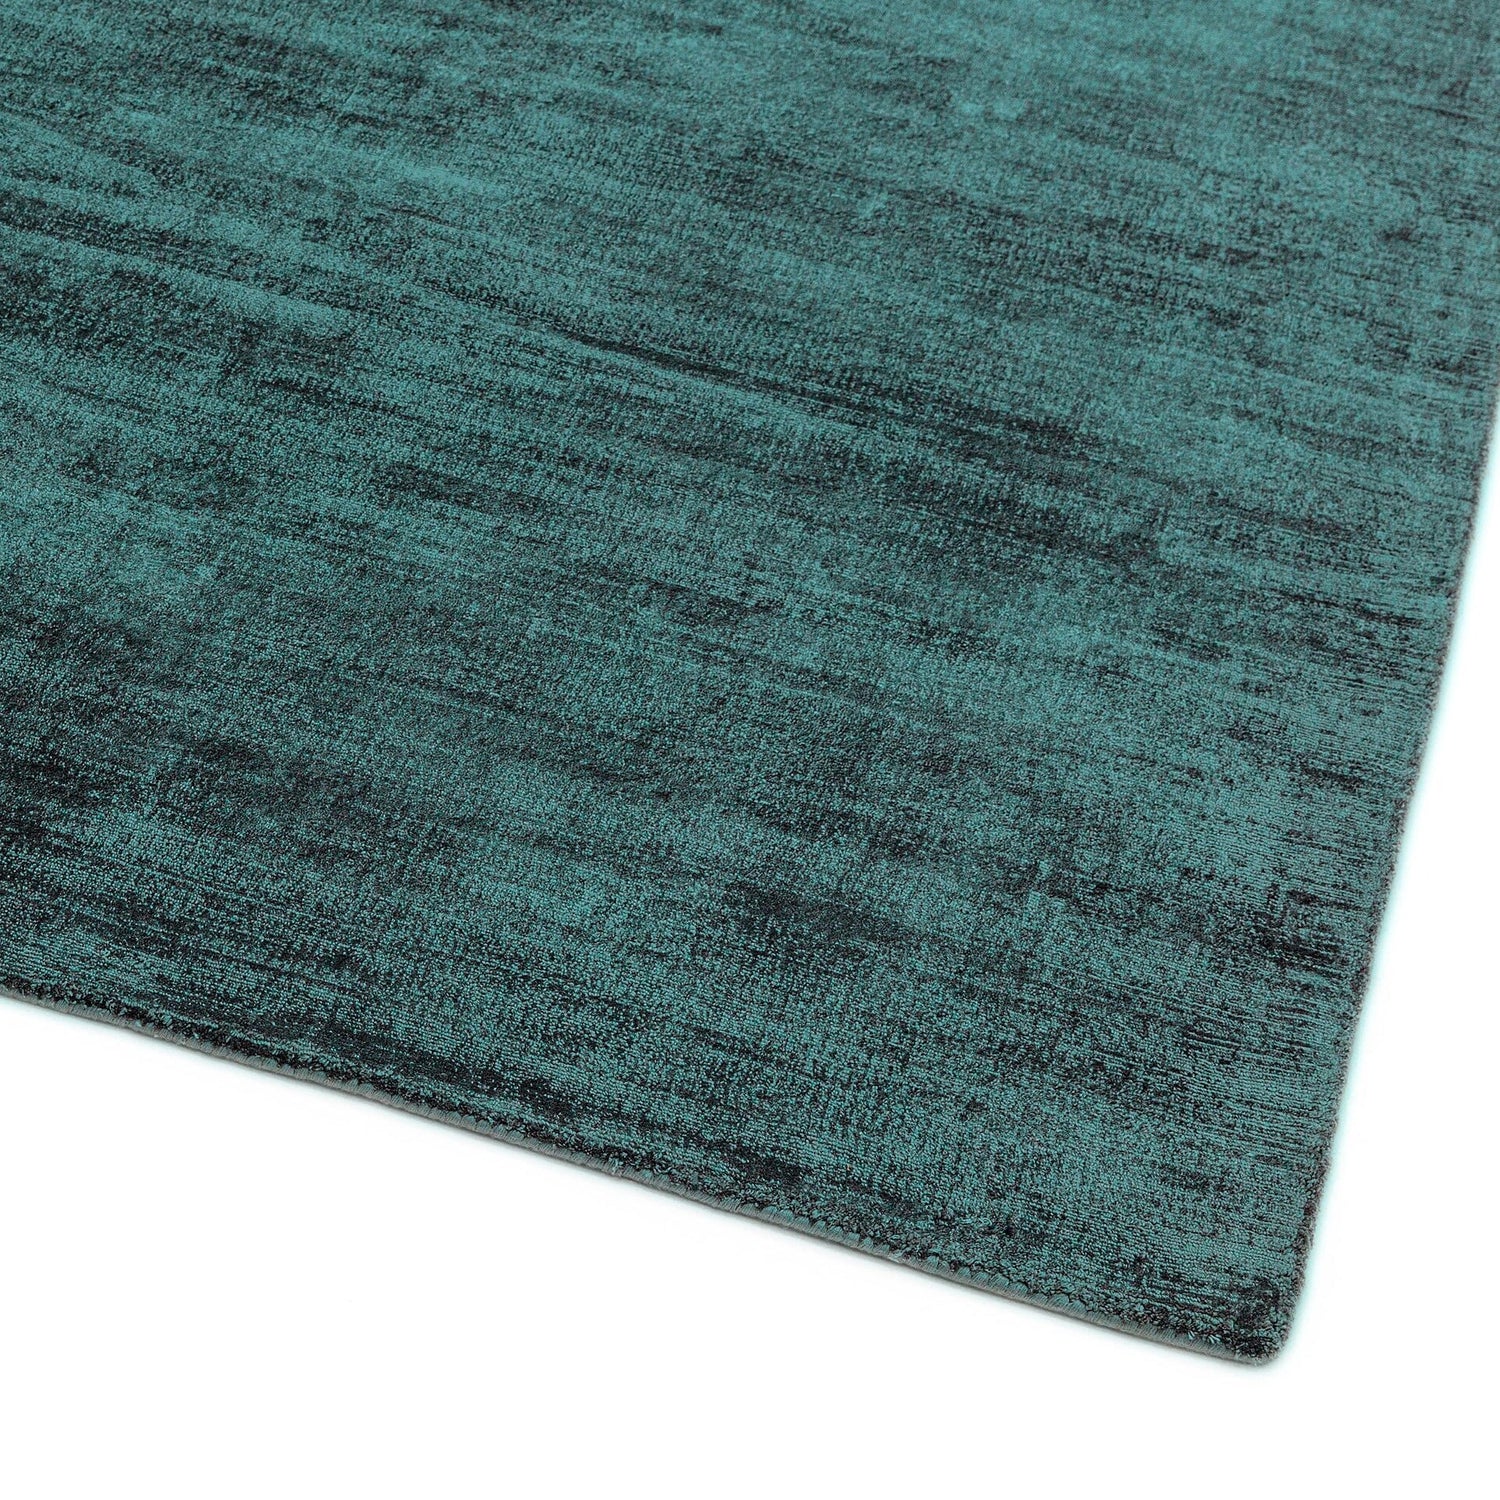  Asiatic Carpets-Asiatic Carpets Blade Hand Woven Rug Teal - 120 x 170cm-Green 021 